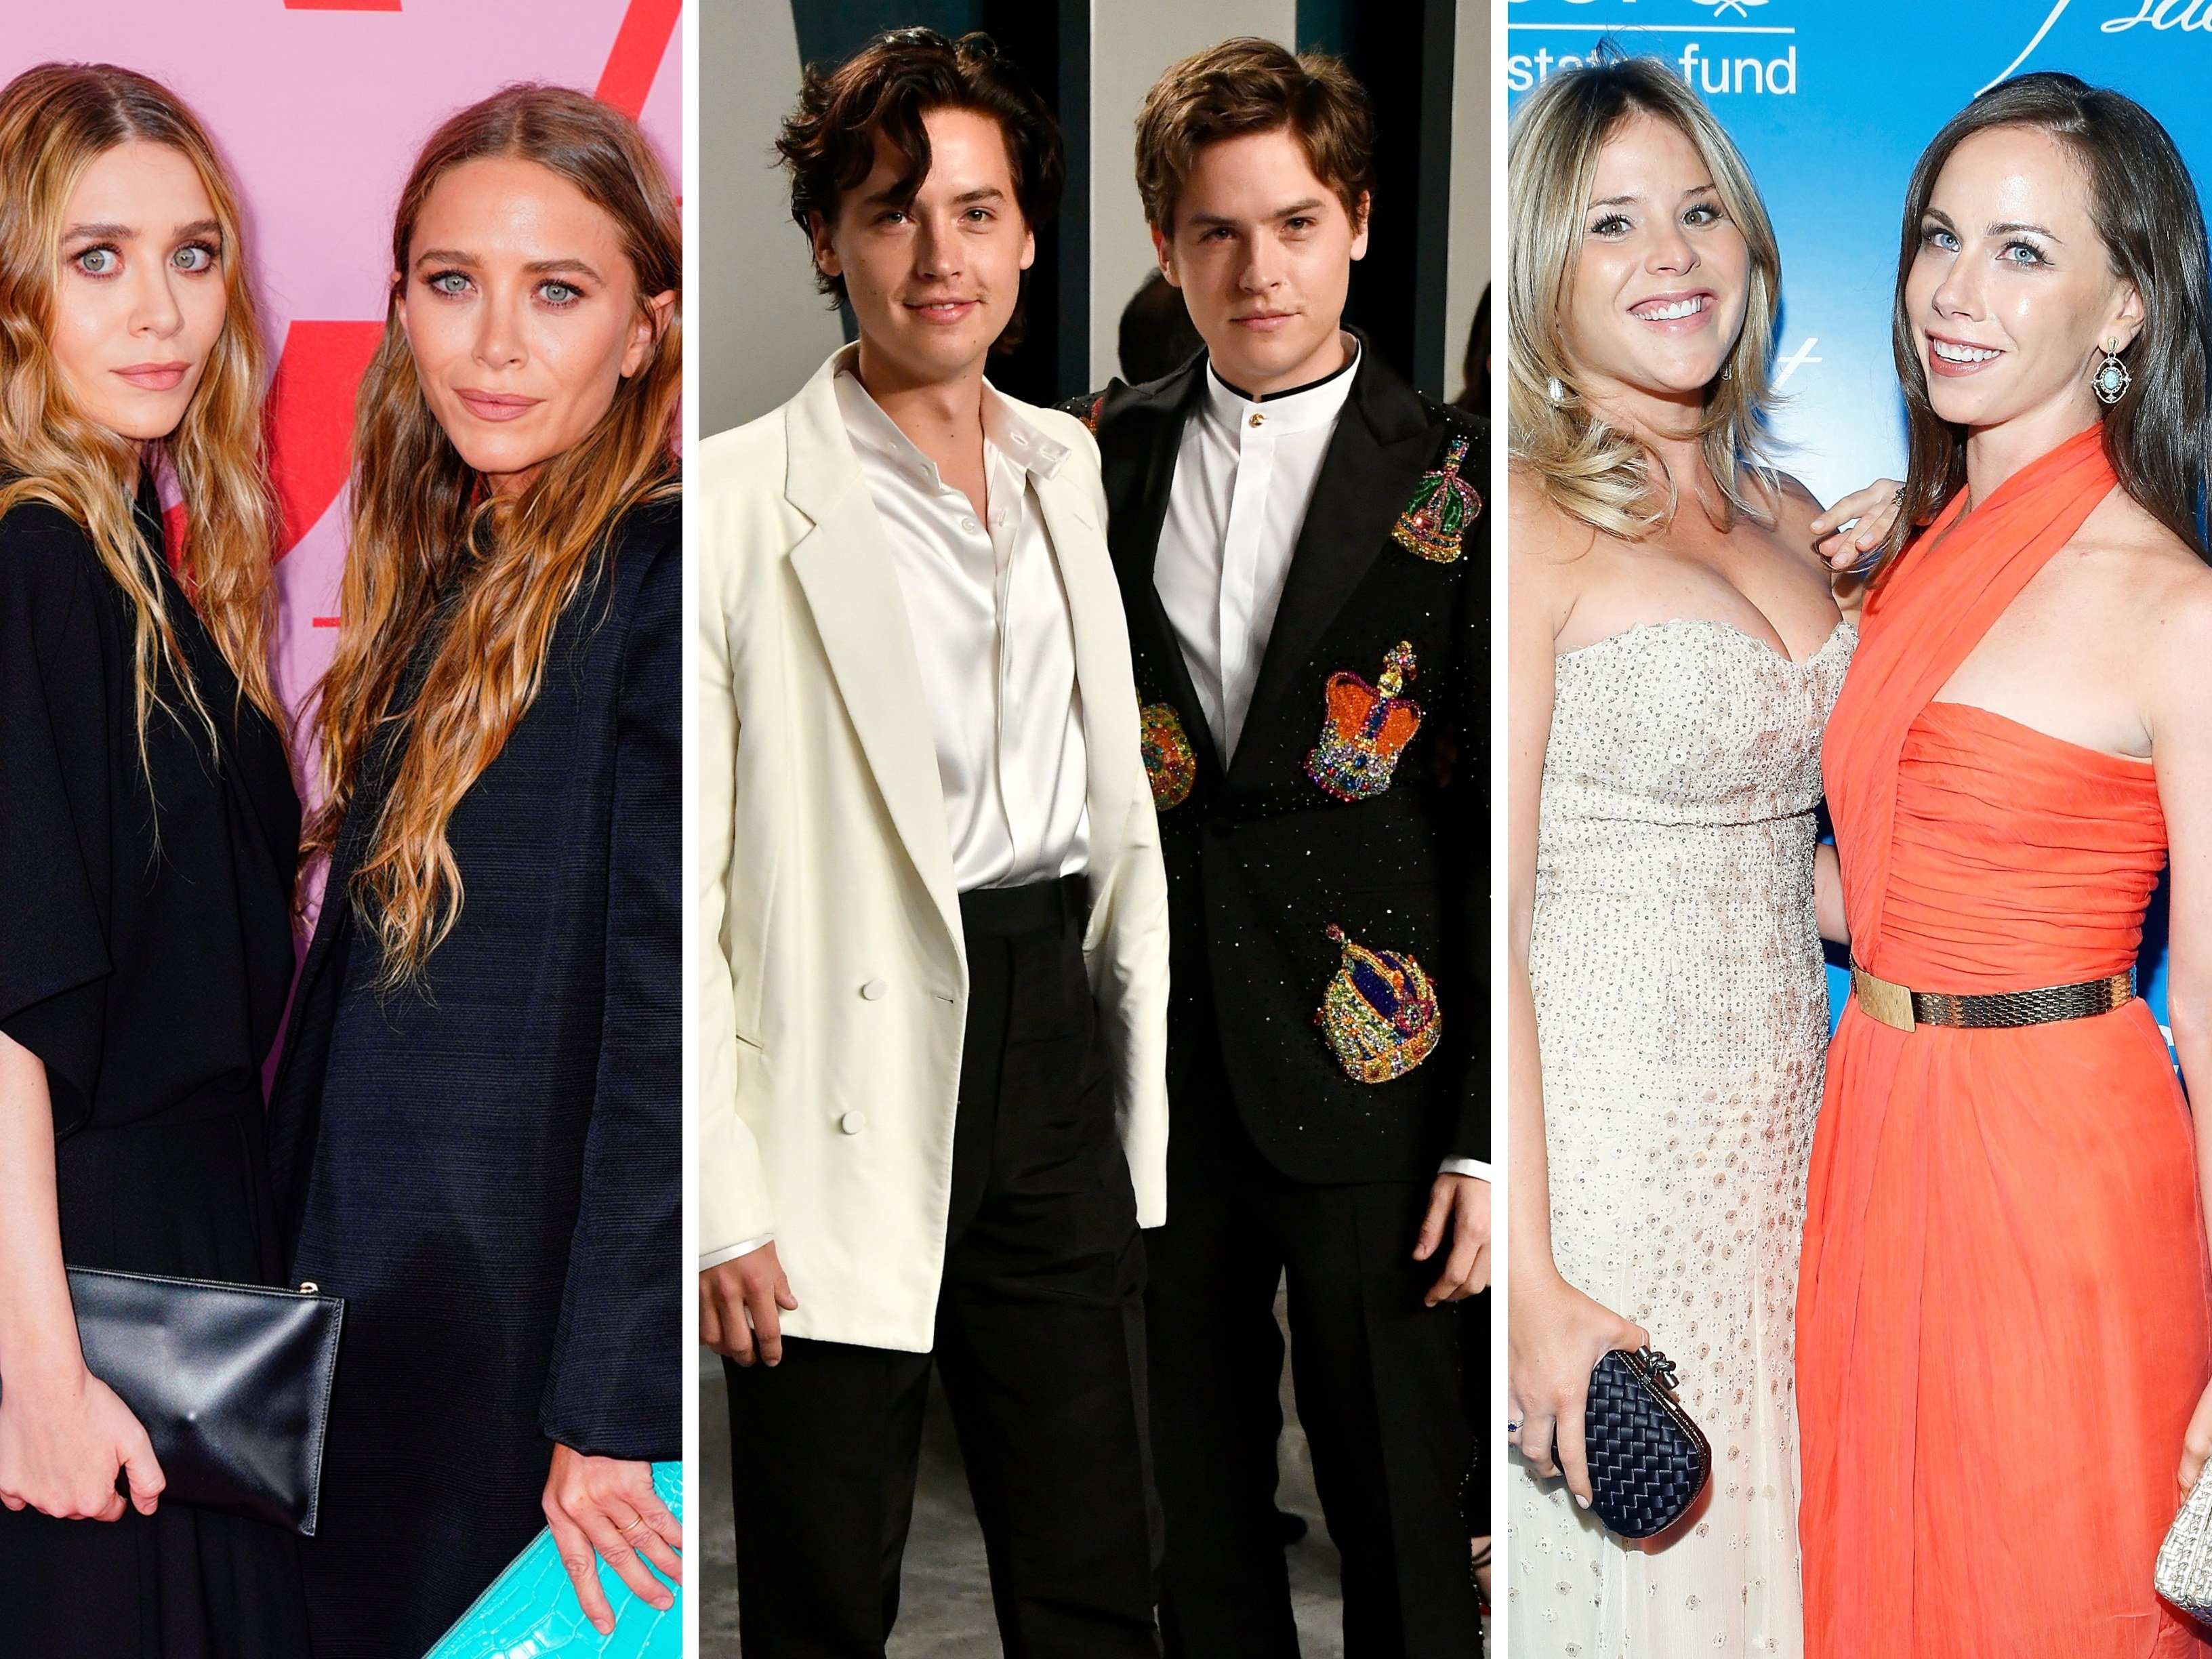 Twins like Mary-Kate and Ashley Olsen, Cole and Dylan Sprouse and Jenna Bush Hager and Barbara Pierce Bush, have all found success in their respective fields. Photos: Getty Images